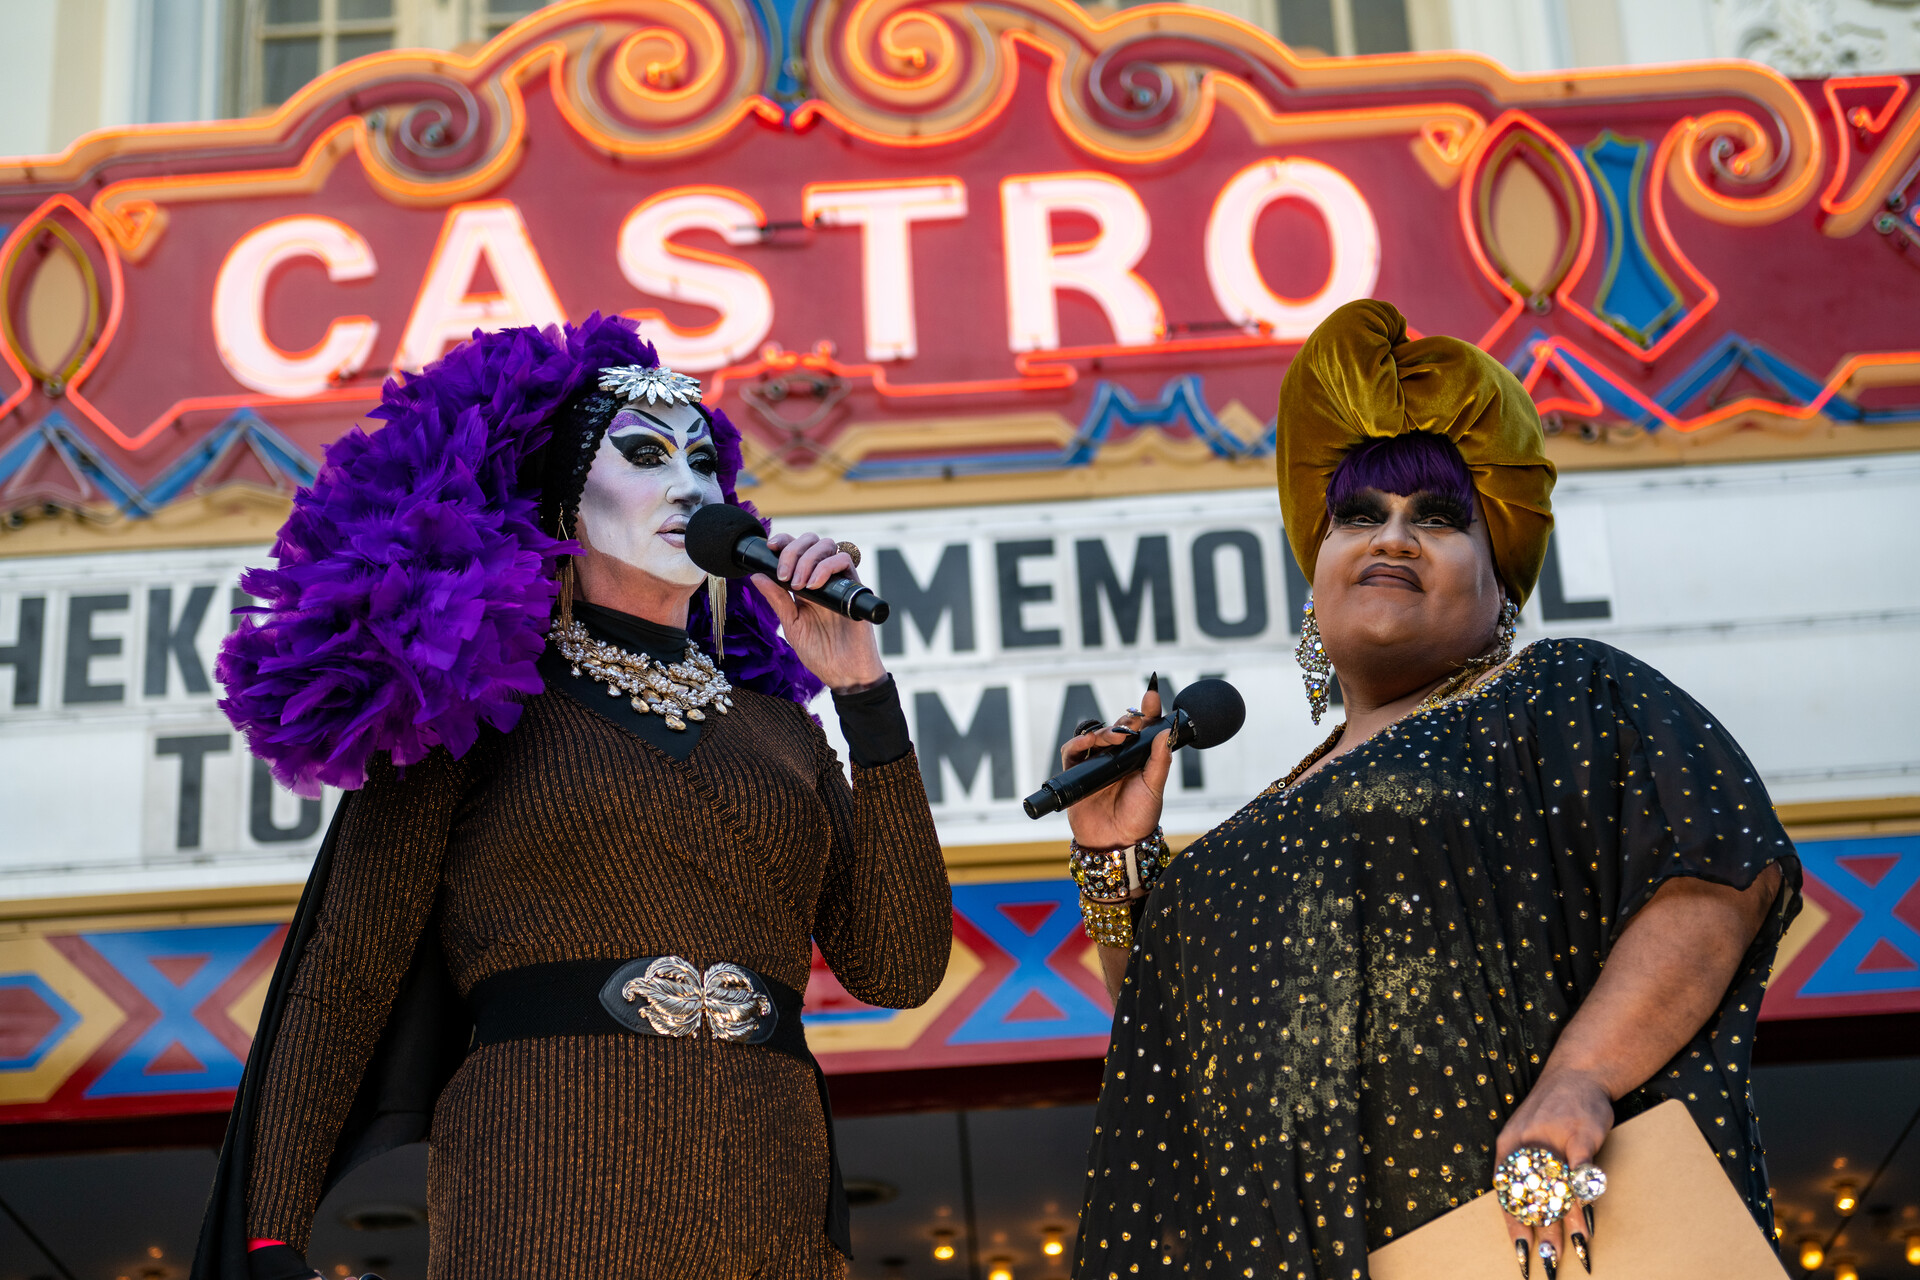 Two drag artists speak with microphones to a large crowd in front of San Francisco's Castro Theater.